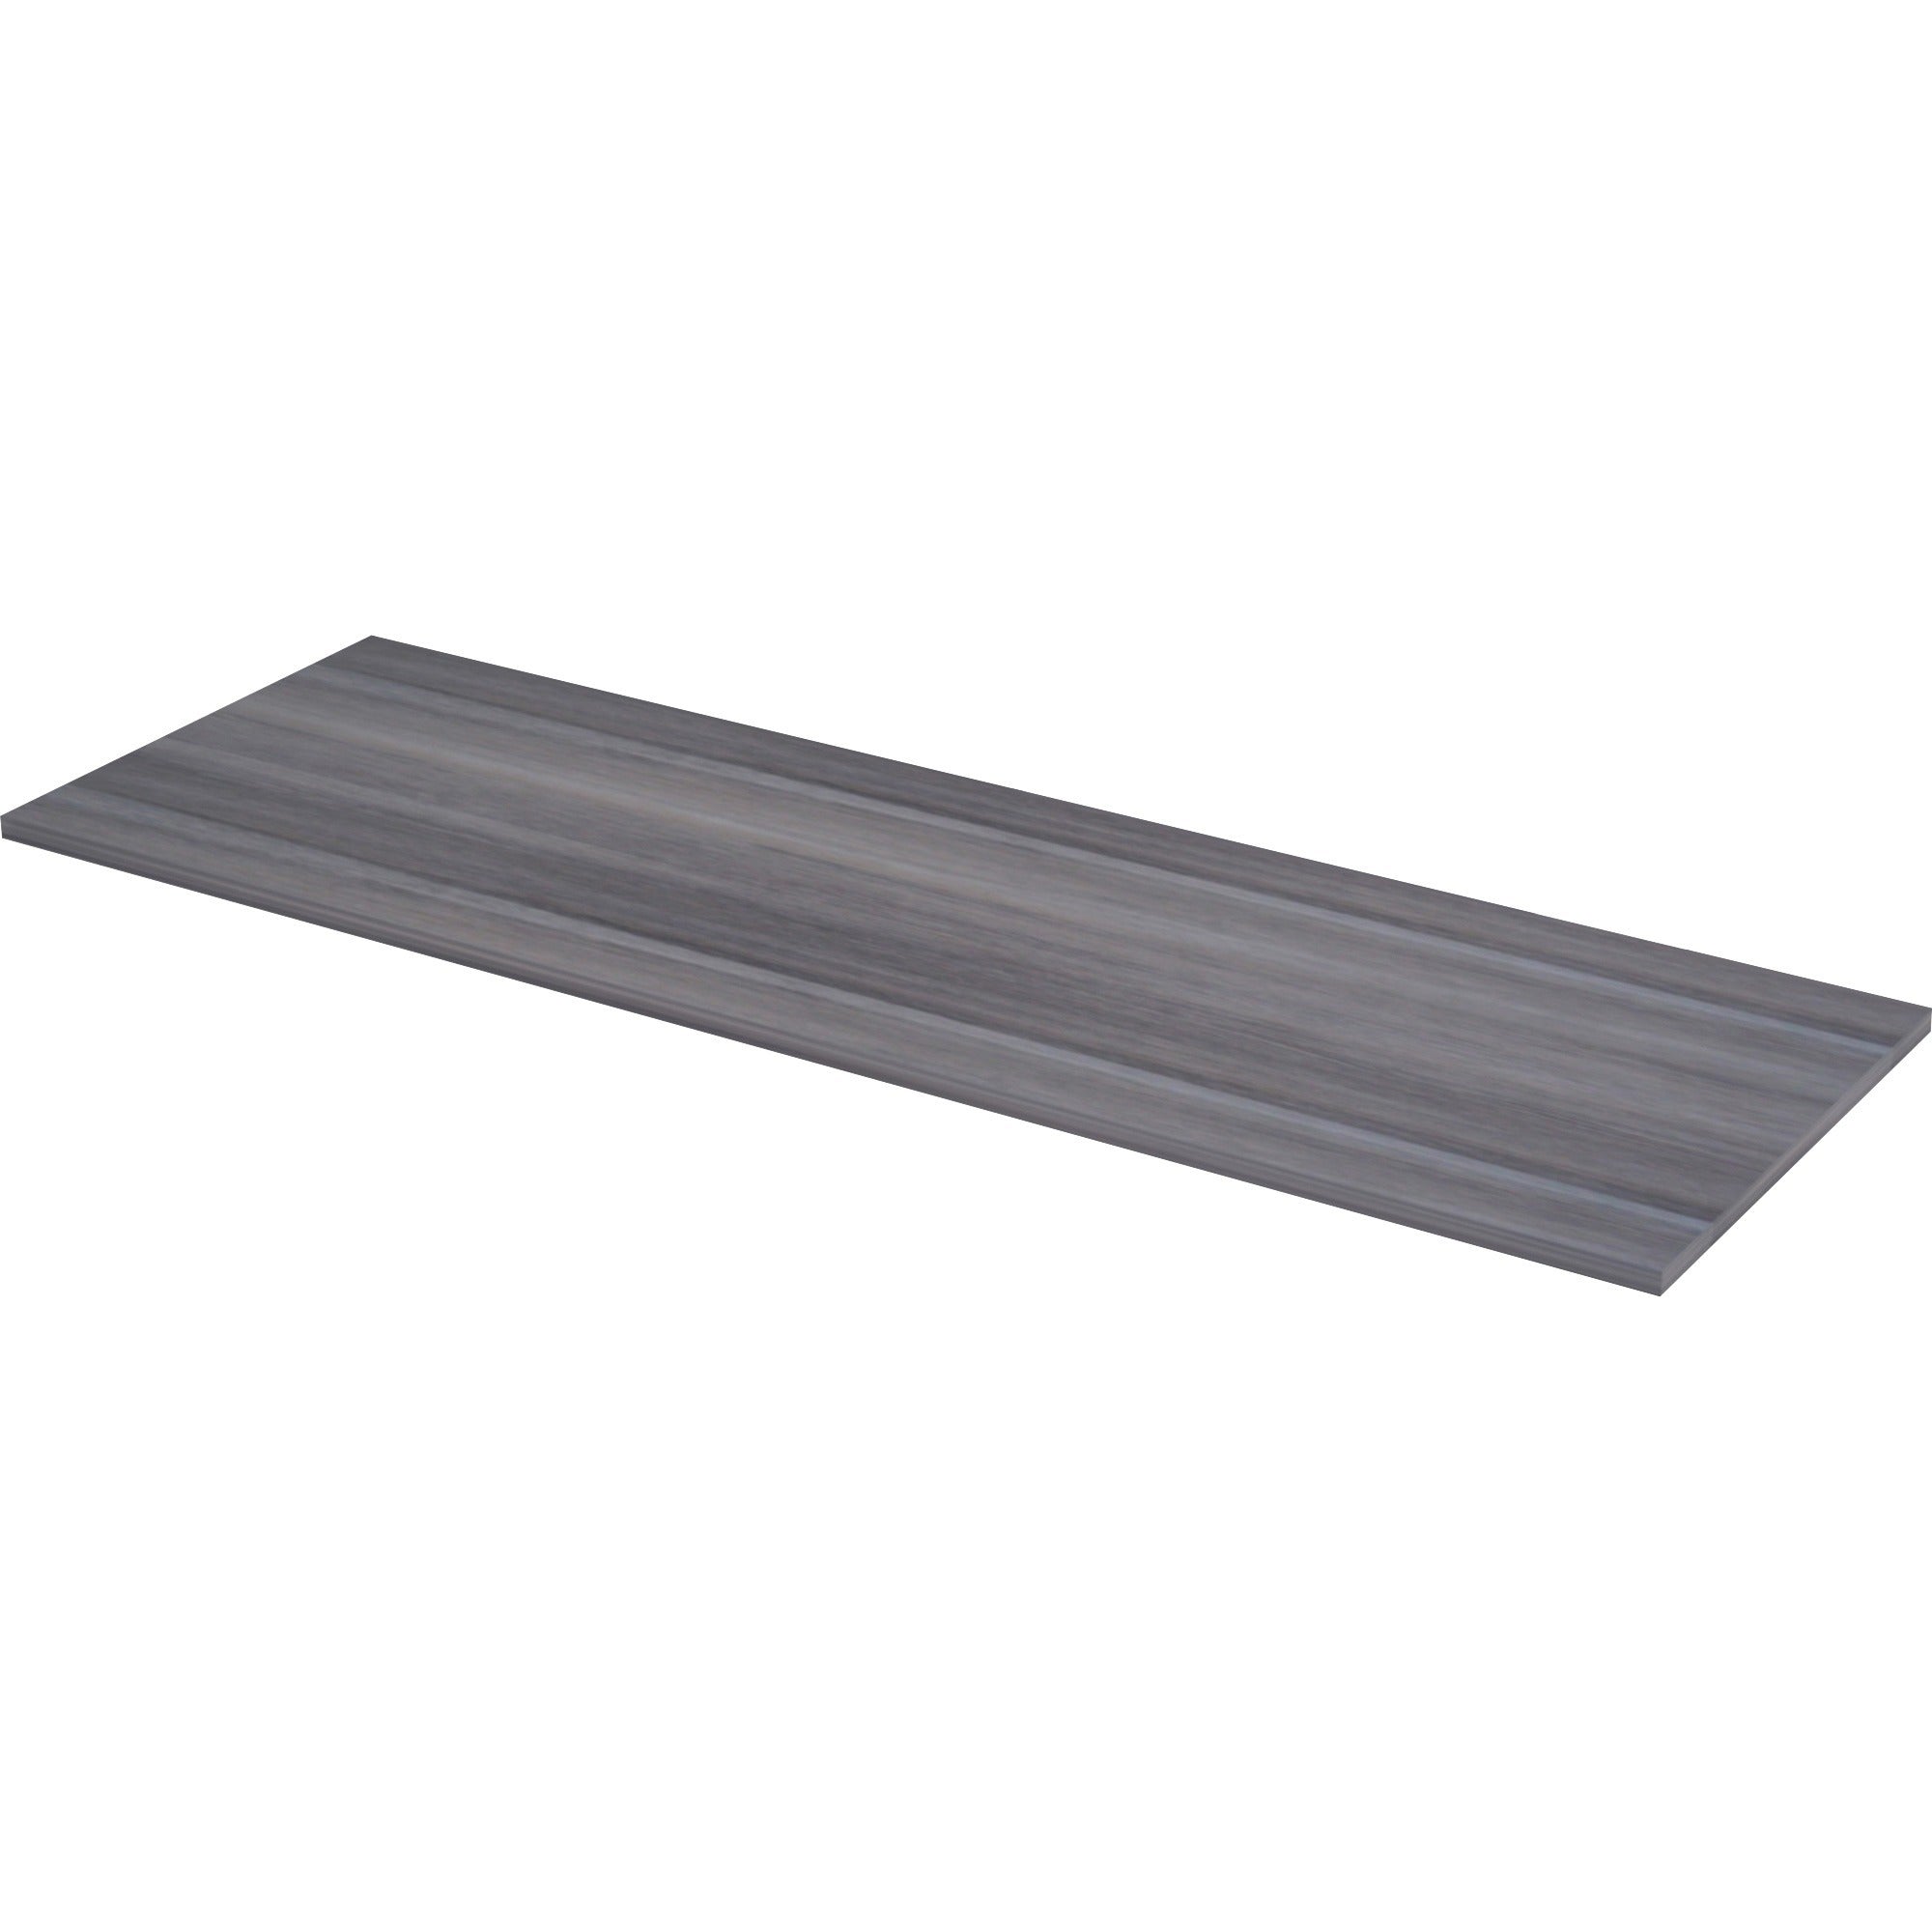 lorell-relevance-series-tabletop-716-x-24-x-1-table-top-straight-edge-finish-charcoal-laminate_llr16199 - 2